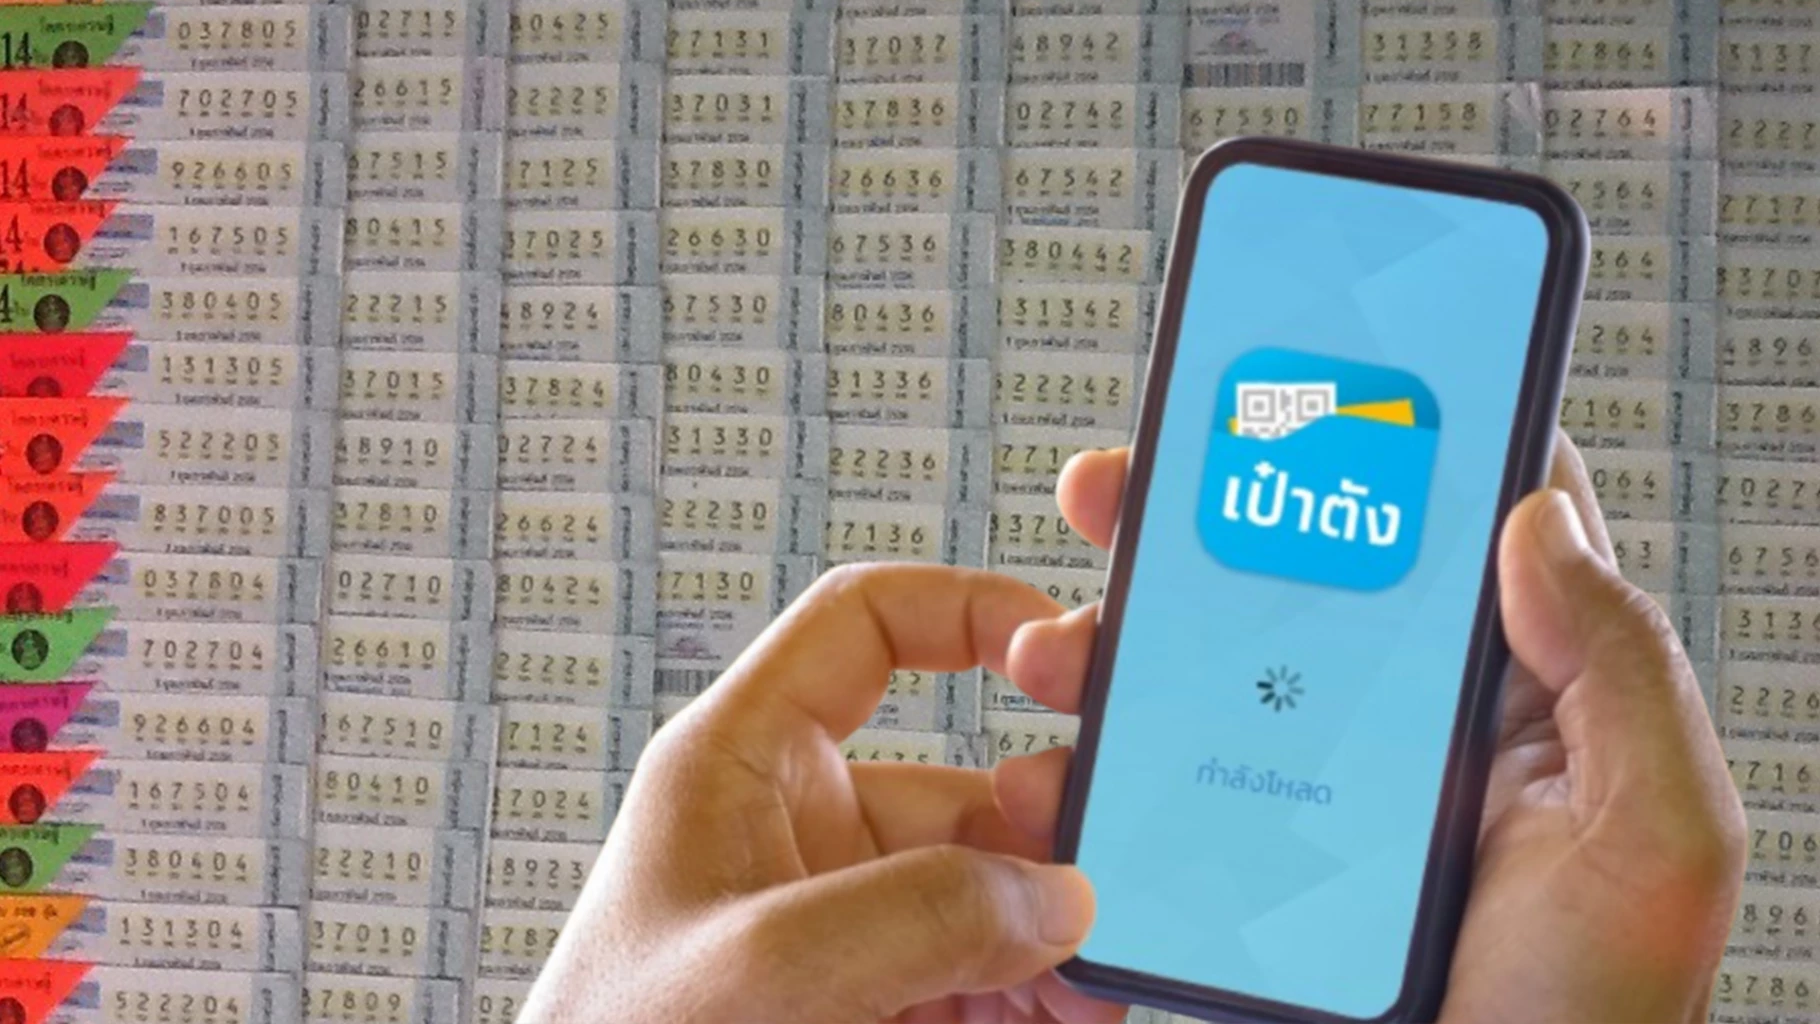 Government Lottery to Sell Lottery Tickets for 80 Baht Via the Pao Tang Mobile App